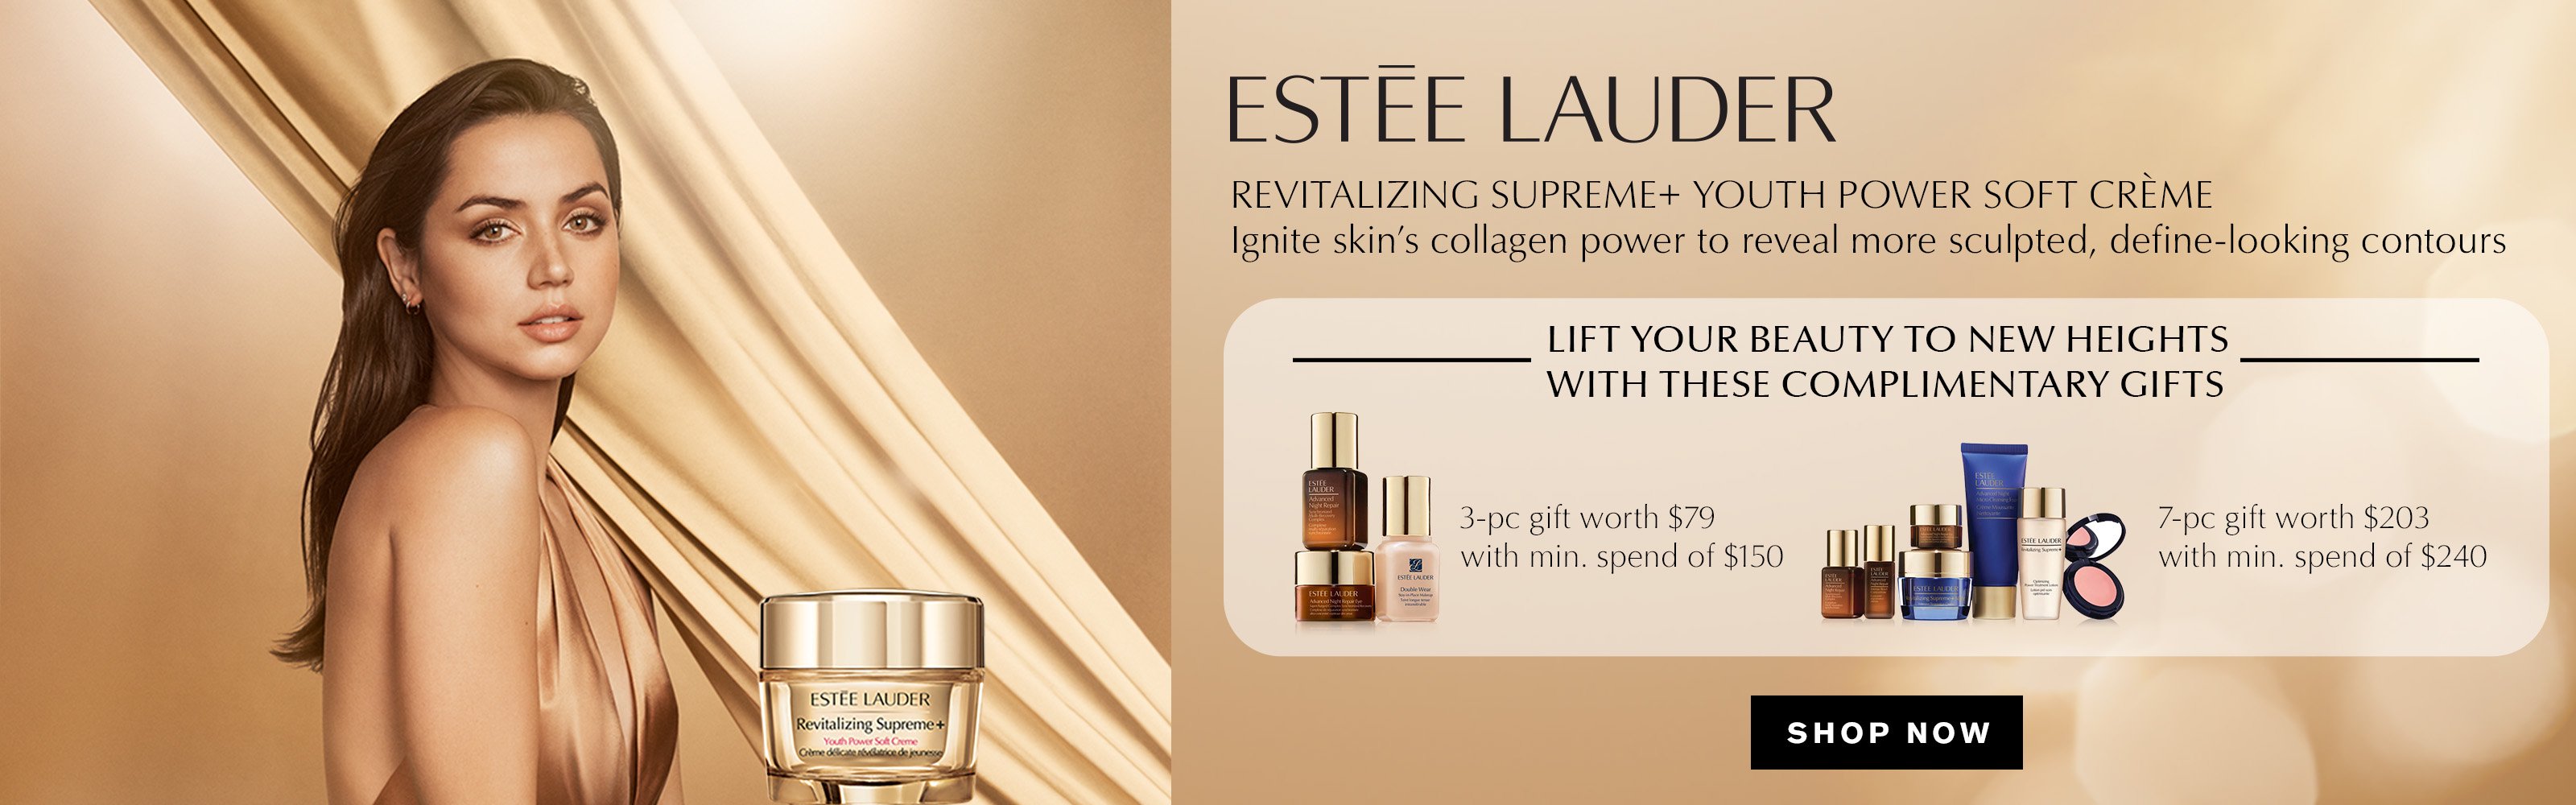 Estee Lauder Complimentary Gifts